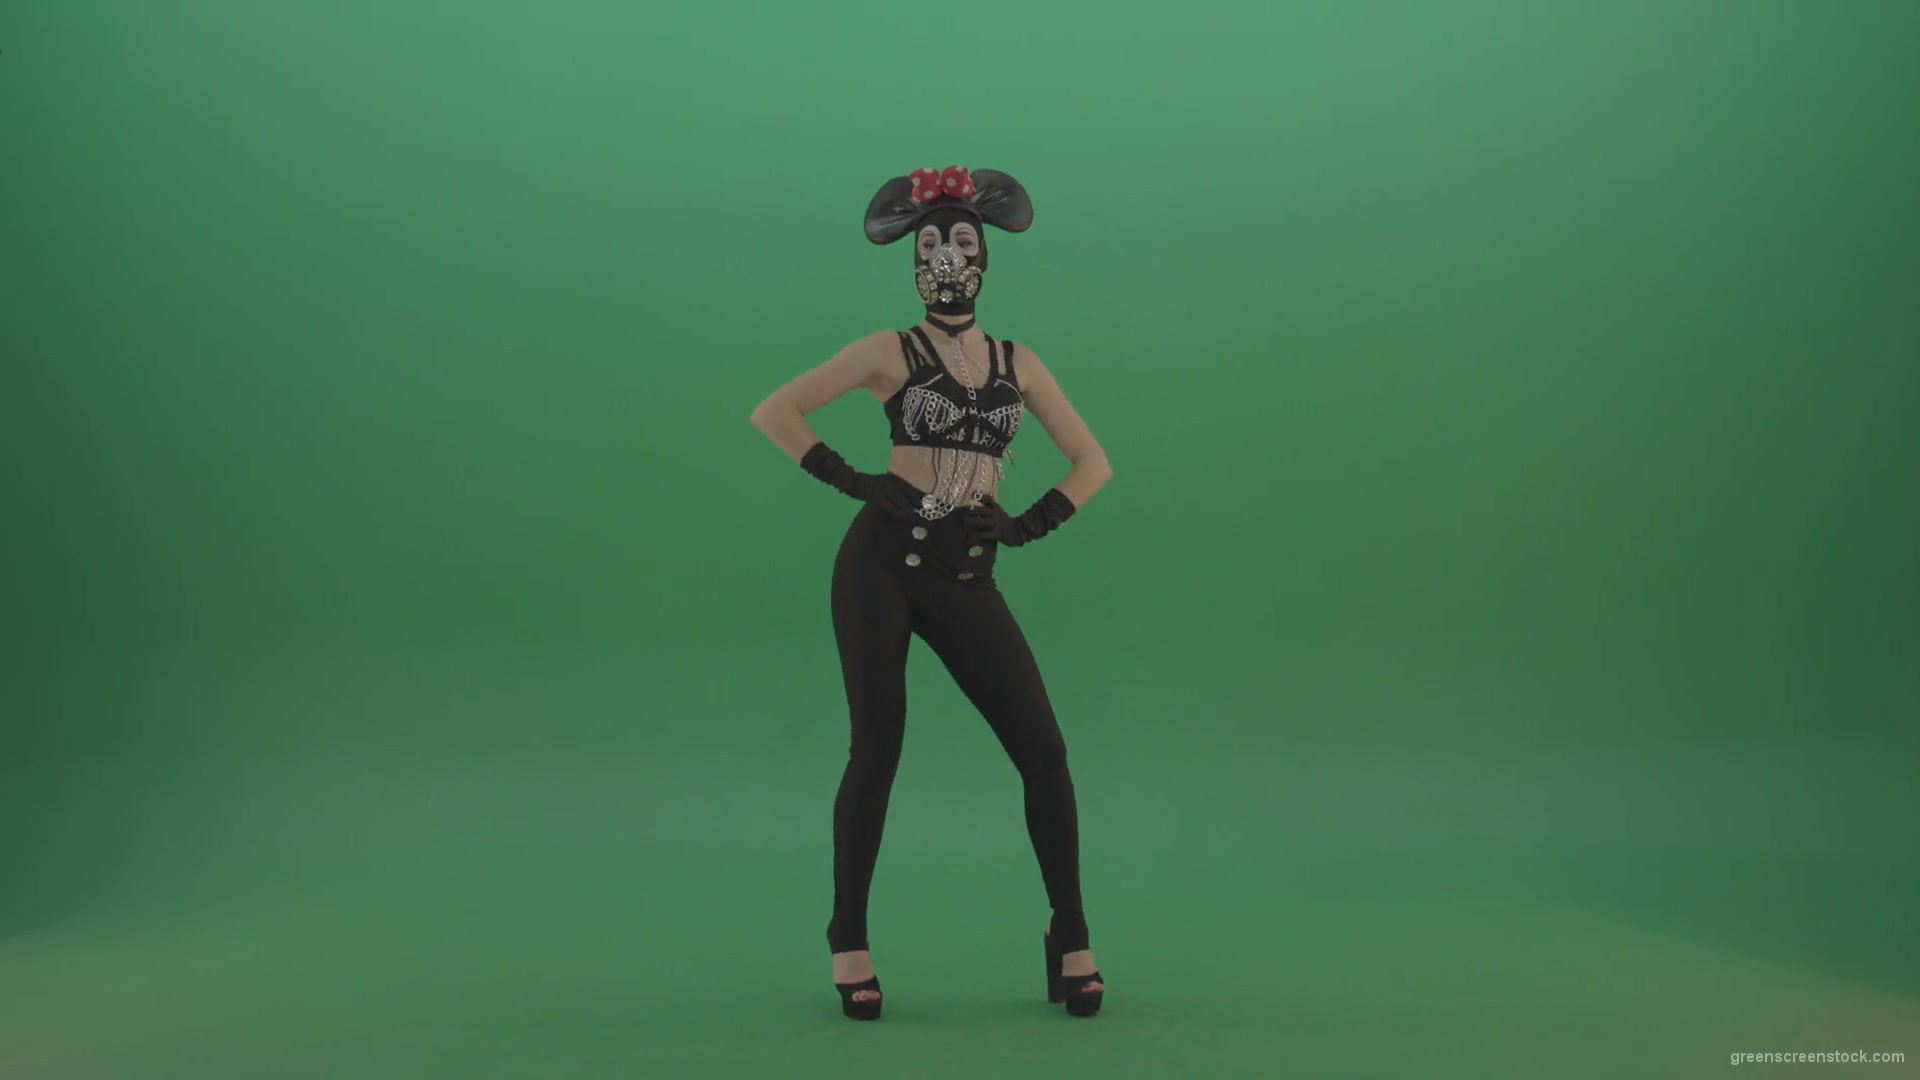 Full-size-strip-girl-in-mouse-costume-and-mask-shaking-ass-and-dancing-on-green-screen-1920_009 Green Screen Stock